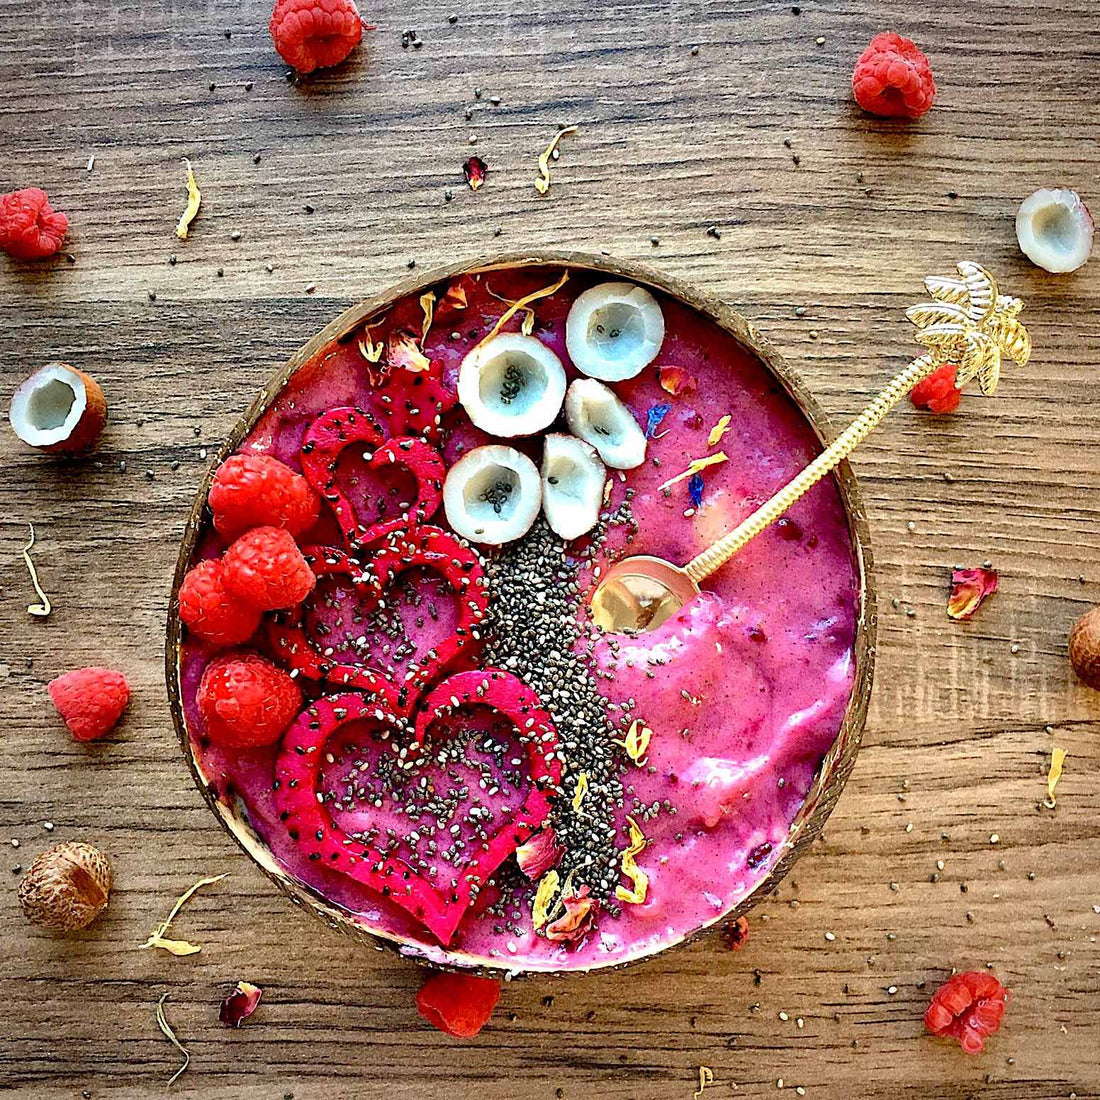 Raspberry, Pitaya and Red Currant Smoothie Bowl